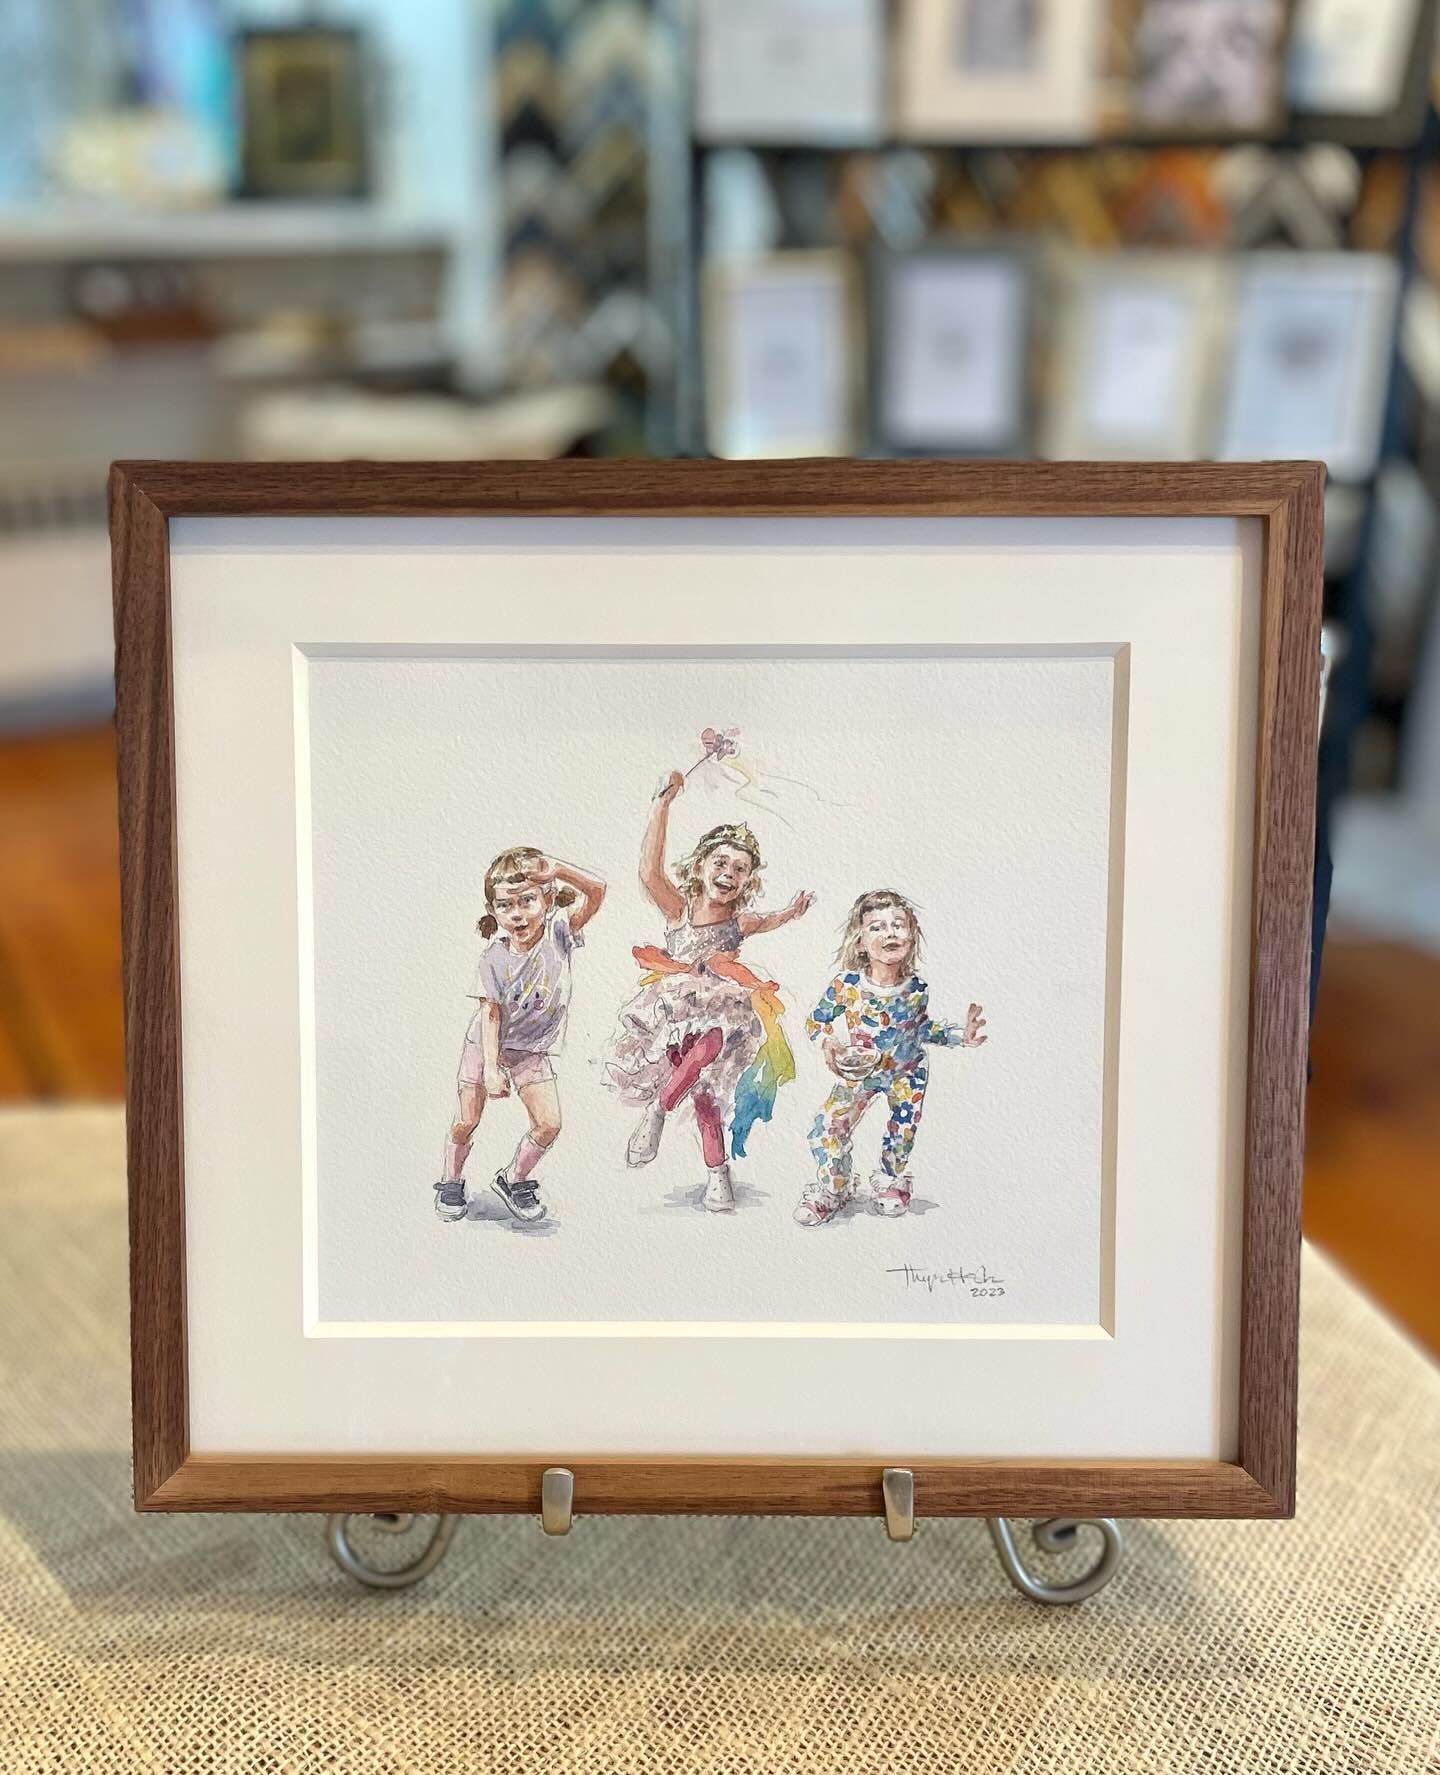 Commissioned illustration&mdash; dance portrait by Thyra Heder.  Framed and ready to showcase.

#watercolorpainting #framing #pictureframing #pictureframingshop #Bedfordny #upperwestchester #northernwestchester #bedfordvillagebuzz #truvueglazing #mus